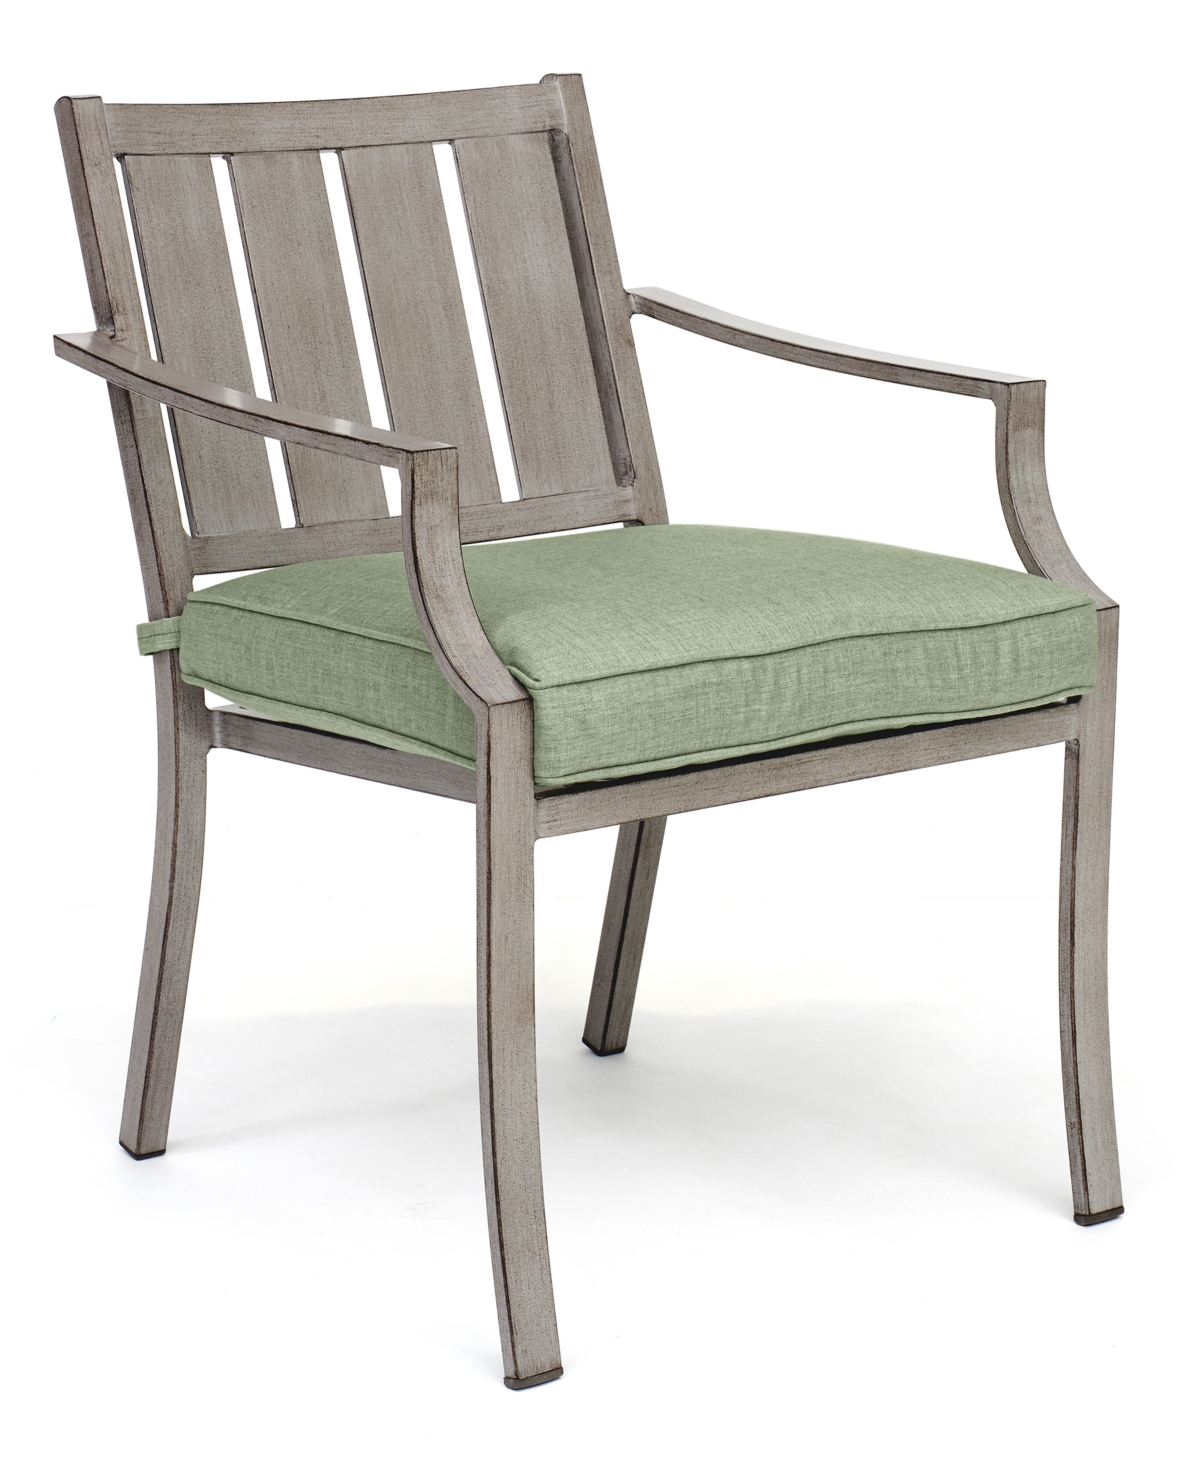 Shop Agio Set Of 6 Wayland Outdoor Dining Chair, Created For Macy's In Outdura Grasshopper